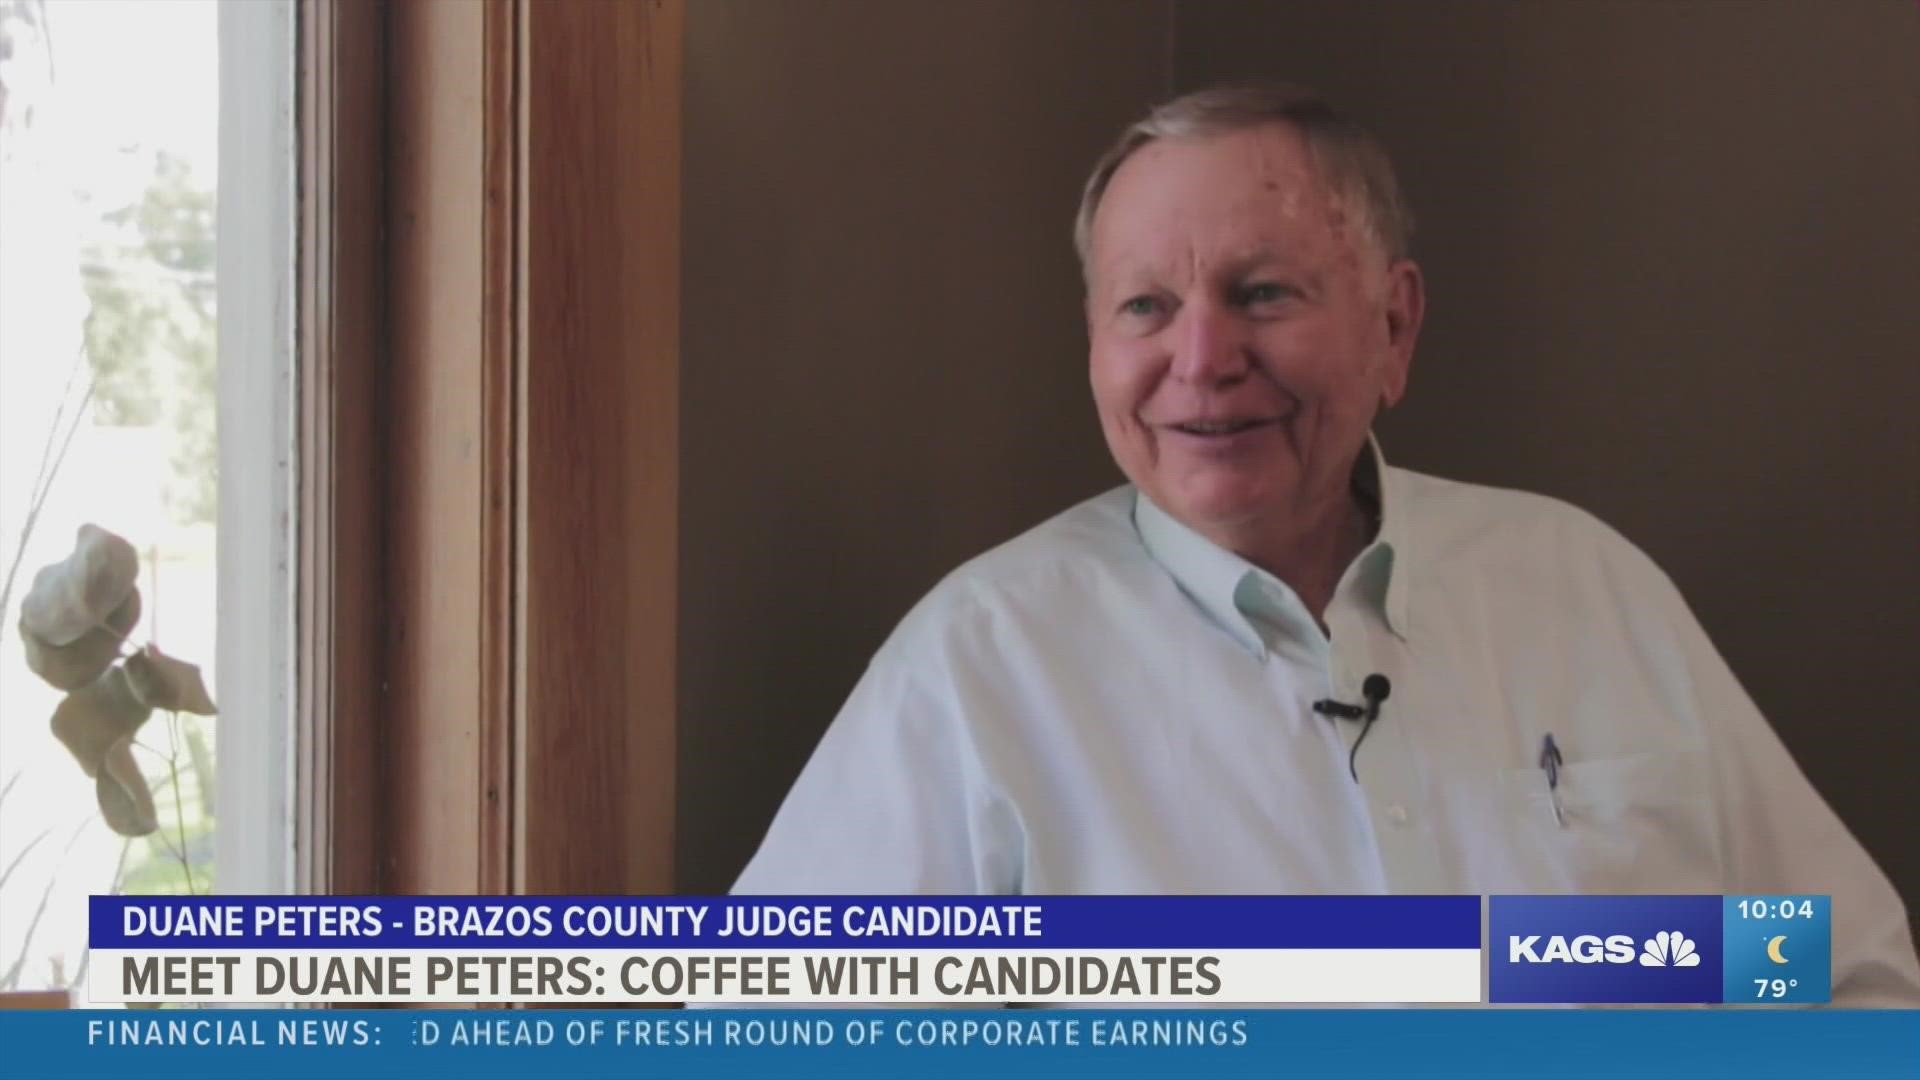 Duane Peters is the incumbent in the race for Brazos County Judge after serving for more than a decade in office.